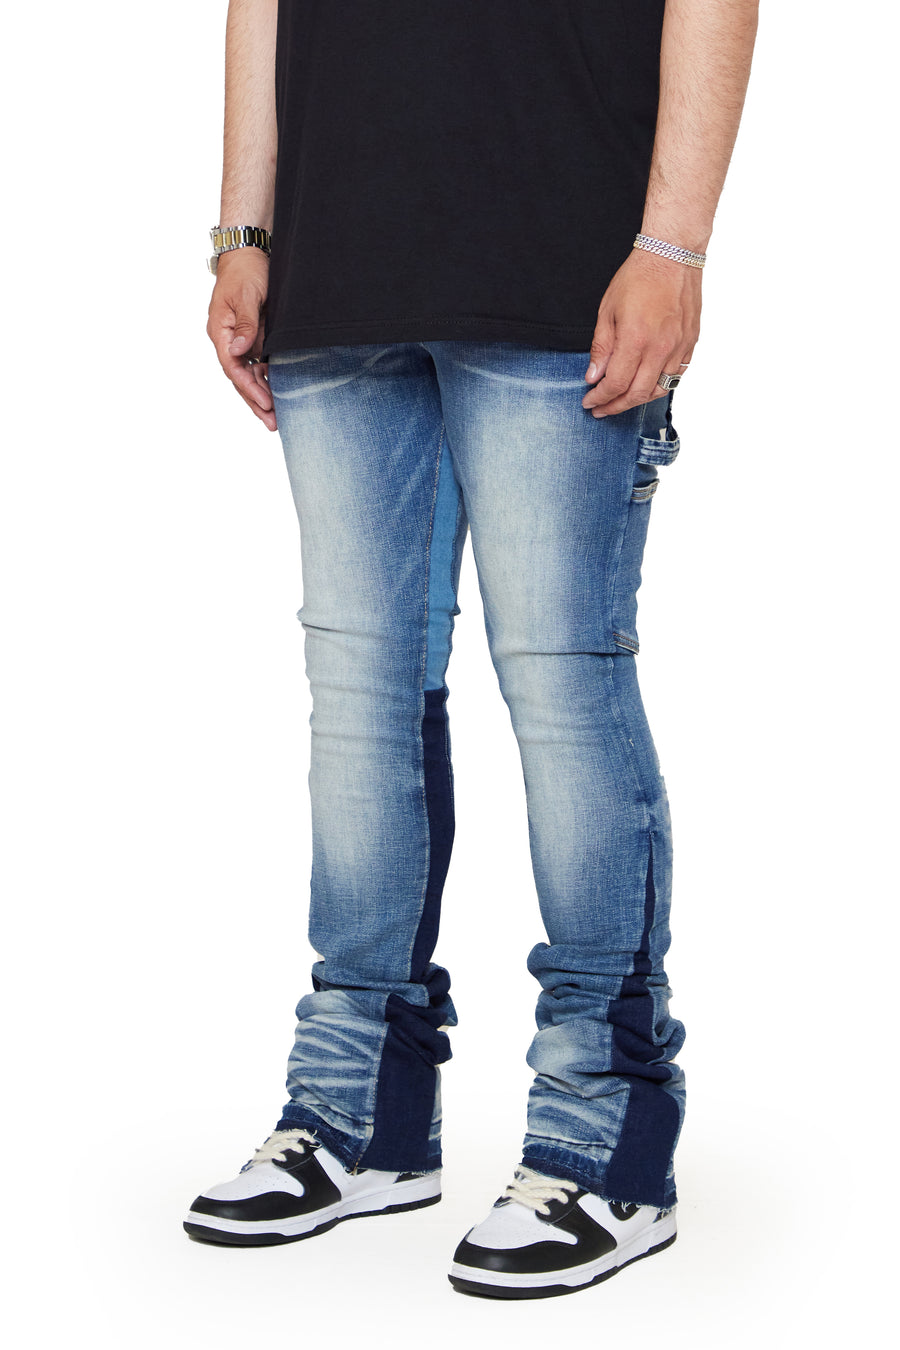 “VERTICLE” BLUE WASH STACKED FLARE JEAN